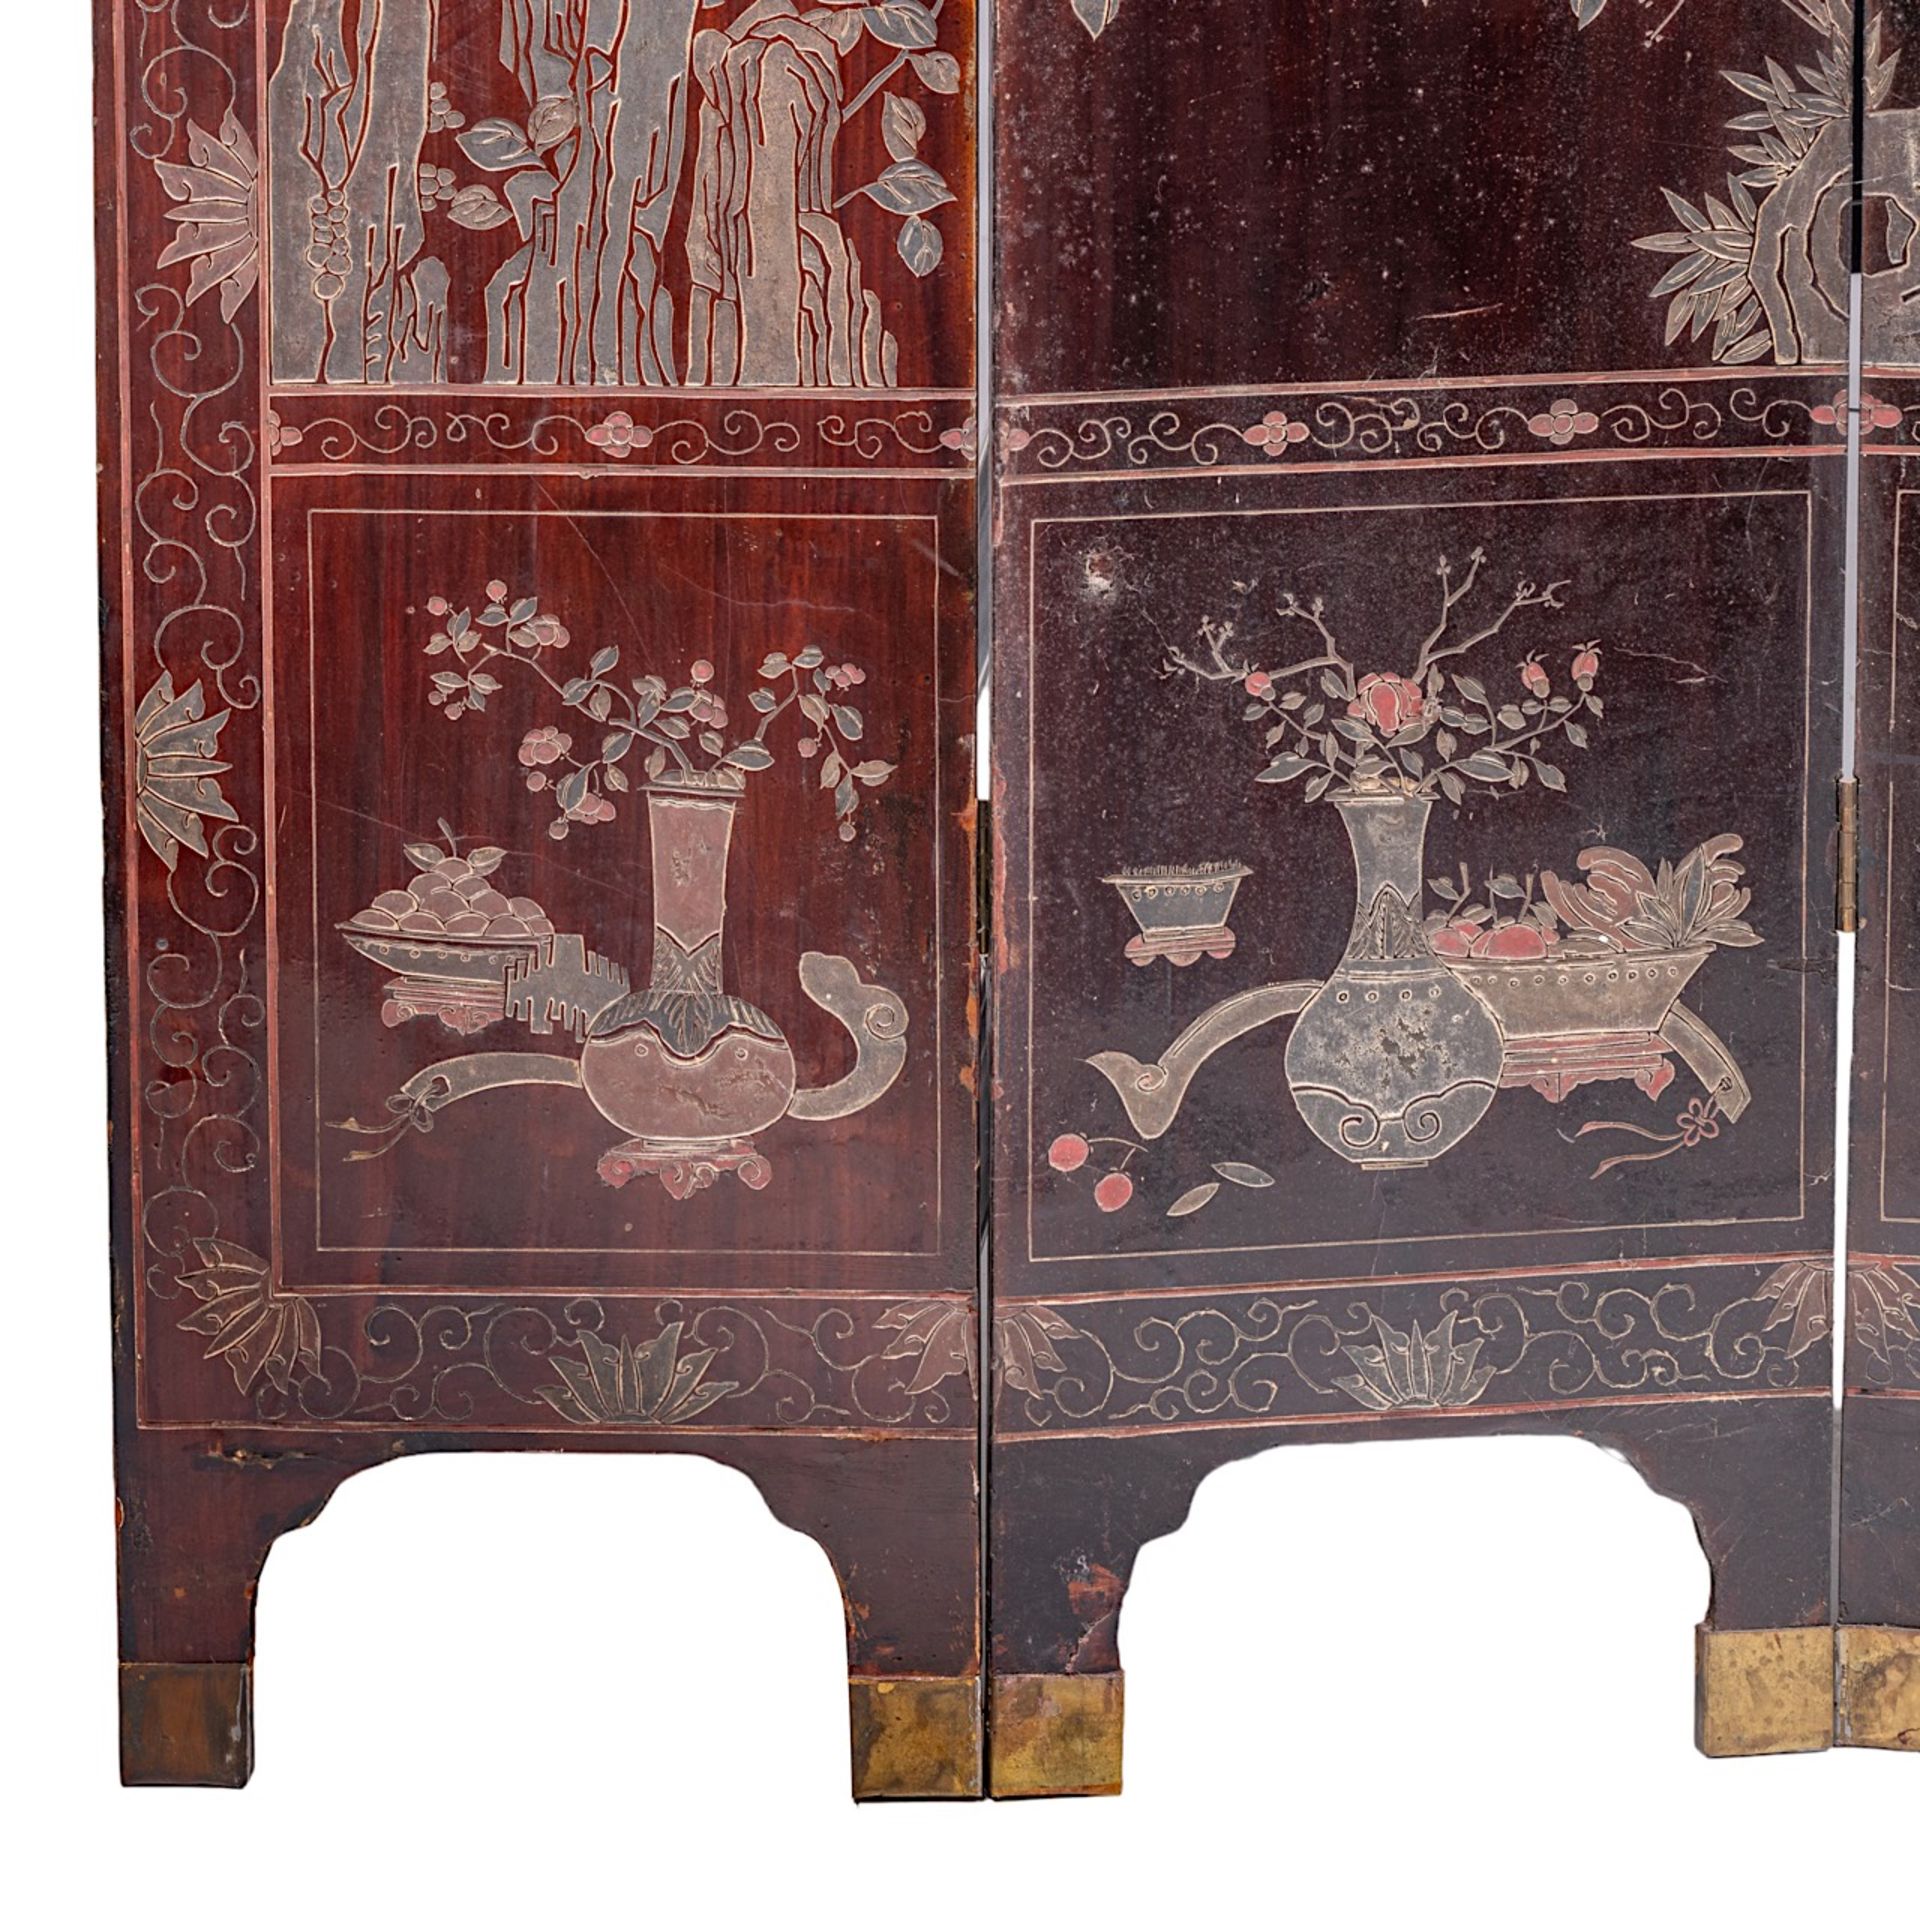 A Chinese coromandel lacquered four-panel chamber screen, late 18thC/19thC, H 162 - W 35,5 (each pan - Image 10 of 10